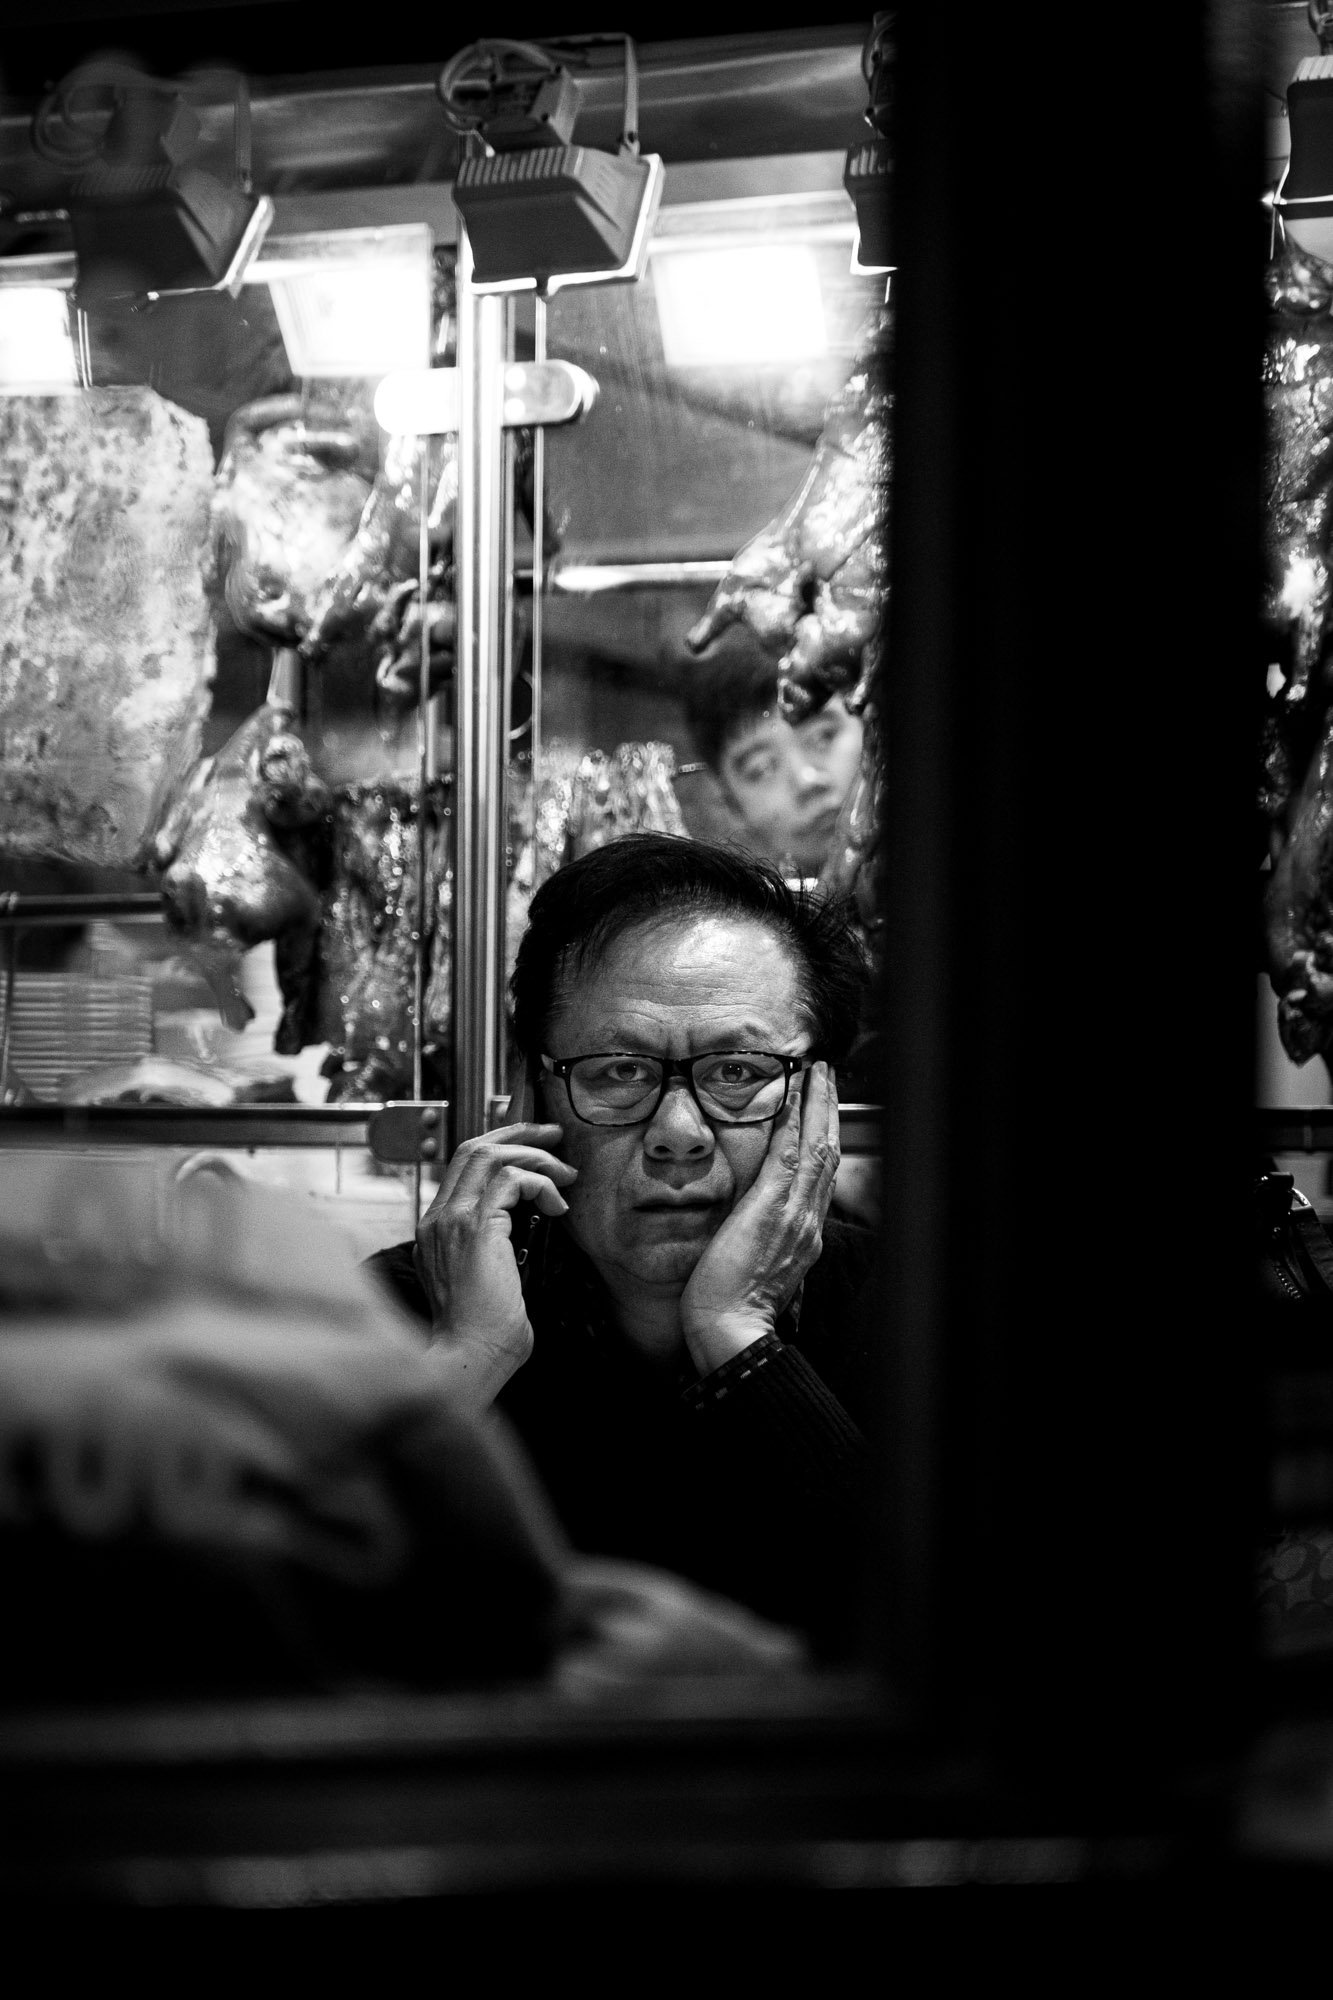 Street Photography - Black and White - Fujifilm - Andy Kirby - MrKirby Photography-03.jpg